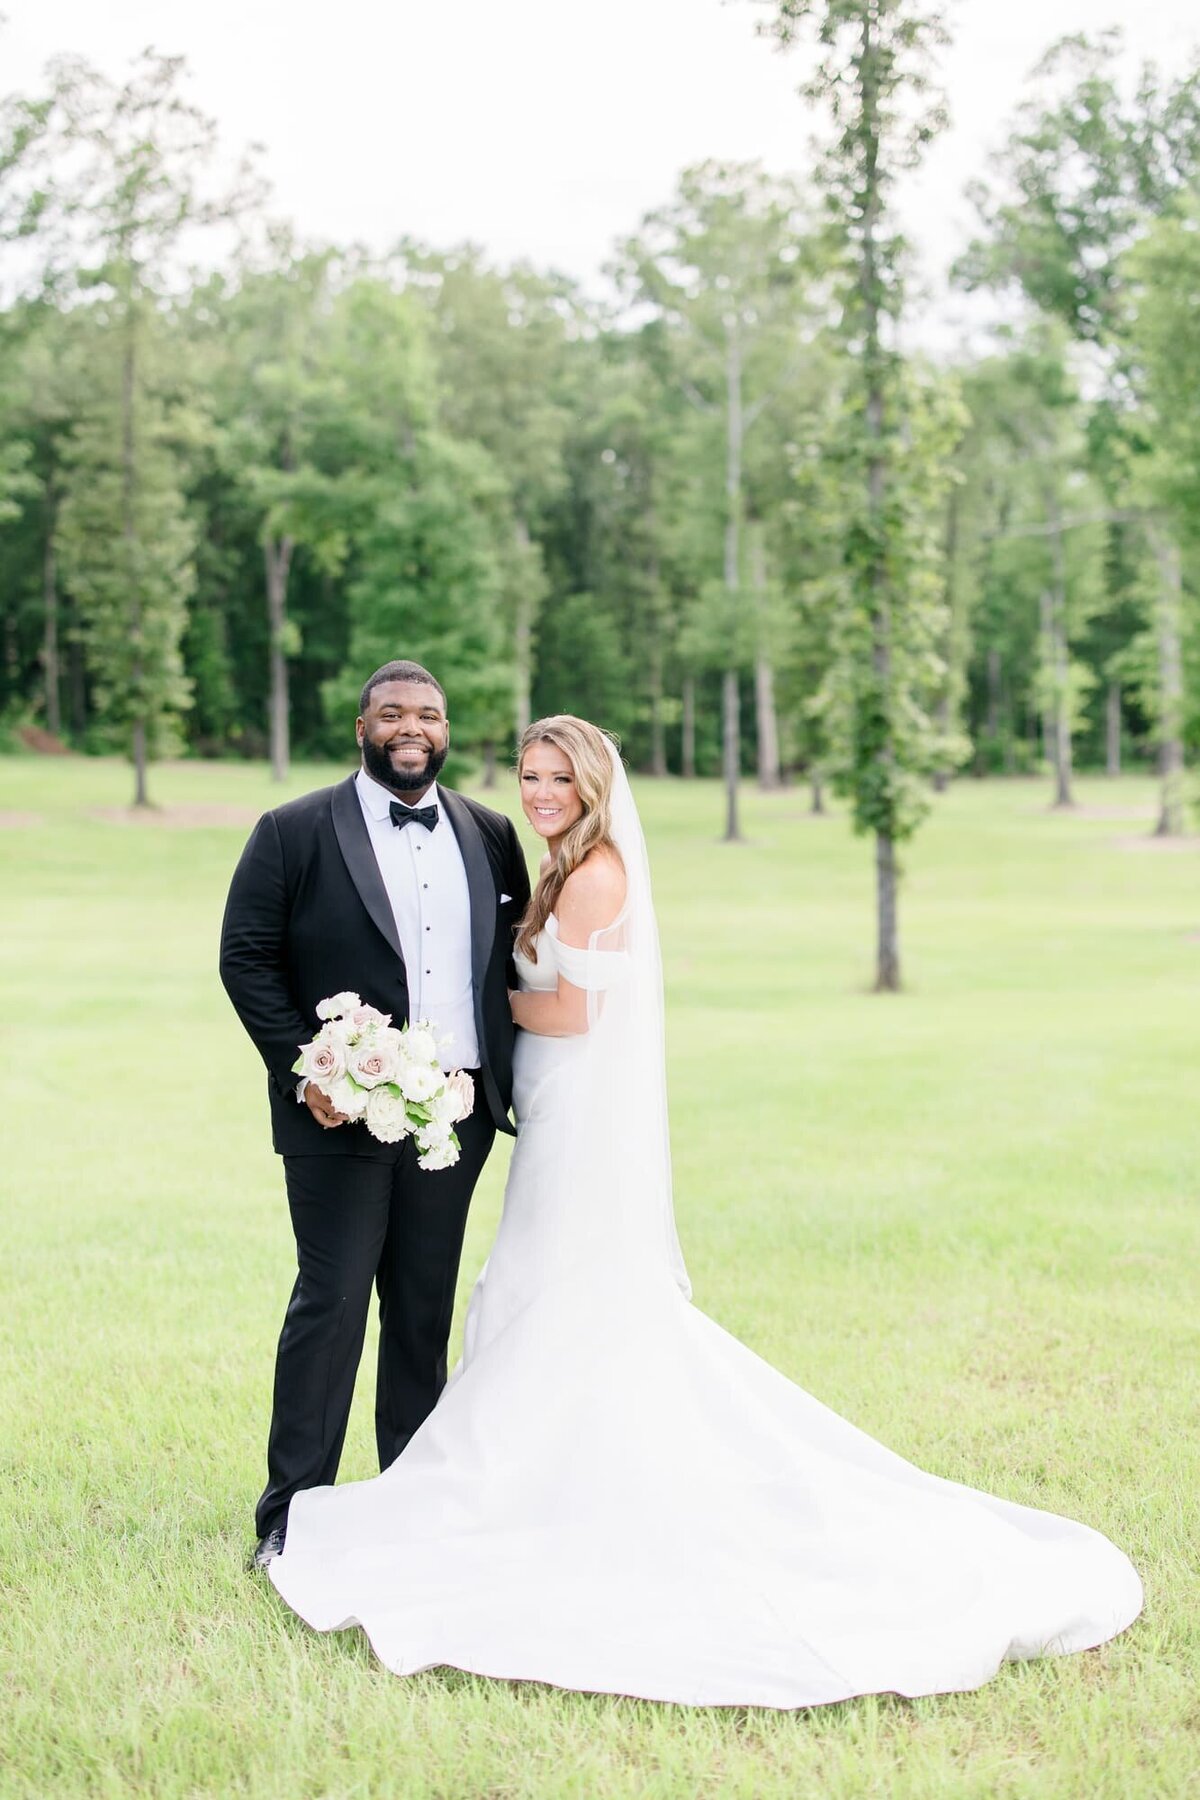 Katie and Alec Wedding Photography Wedding Videography Birmingham, Alabama Husband and Wife Team Photo Video Weddings Engagement Engagements Light Airy Focused on Marriage  Rachel + Eric's Oak Meado_3A7Z